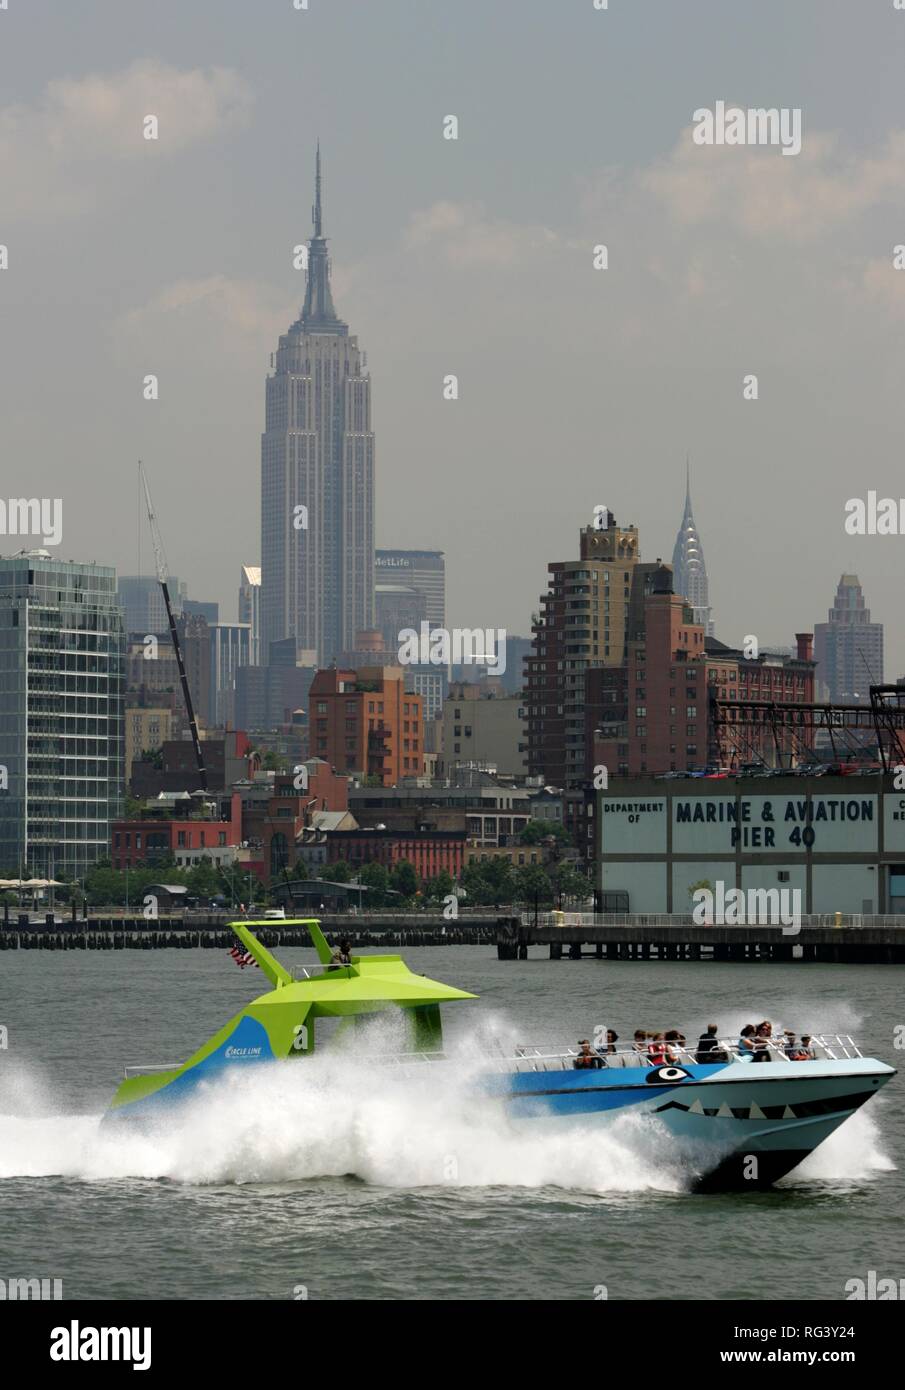 USA, United States of America, New York City: Sightseeing trip on the speedboat 'Beast' on the Hudson River Stock Photo